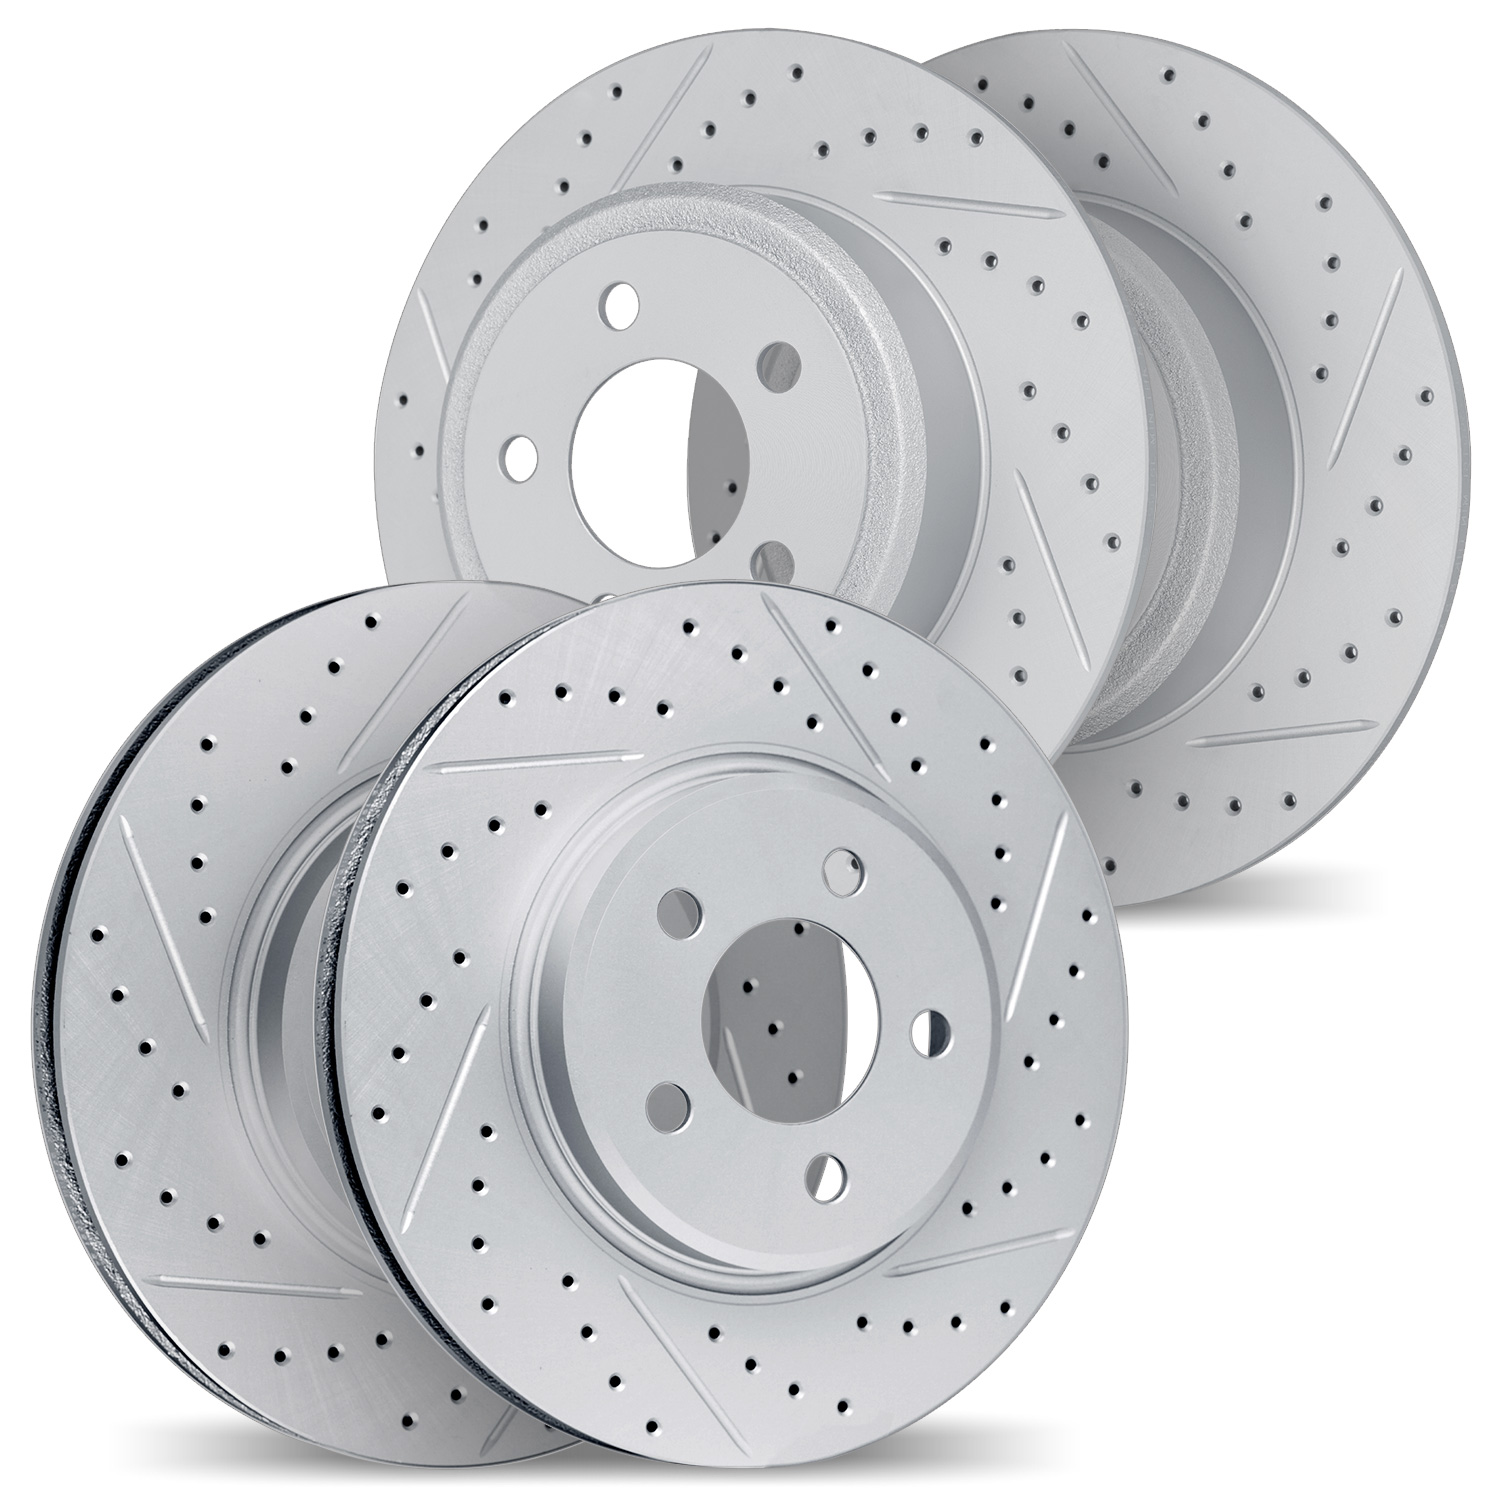 2004-03029 Geoperformance Drilled/Slotted Brake Rotors, 2009-2014 Kia/Hyundai/Genesis, Position: Front and Rear